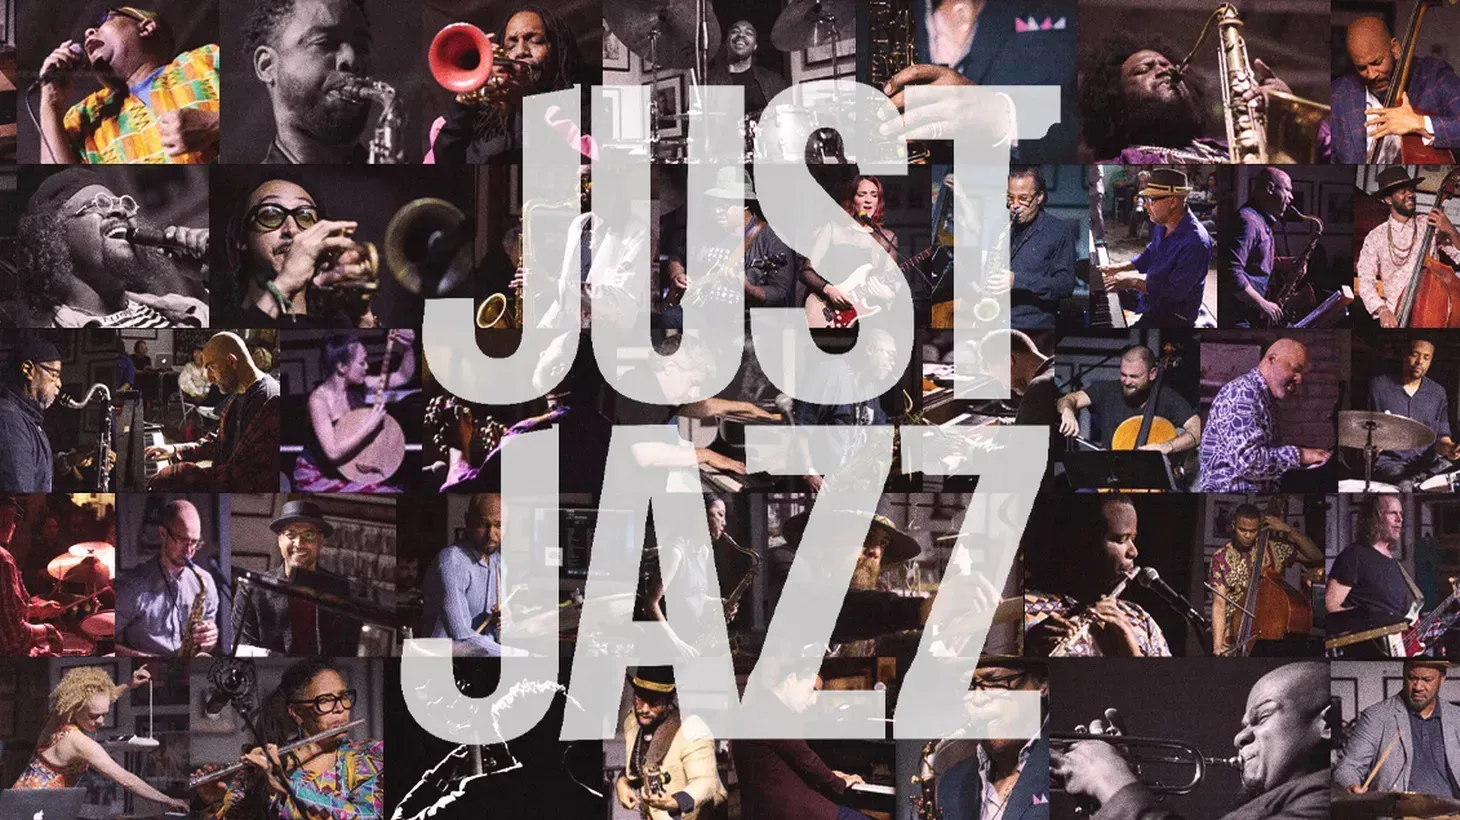 "Just Jazz" with LeRoy Downs. Downs' goal is to bring a varied sonic experience to jazz, while blending music, style, and culture.